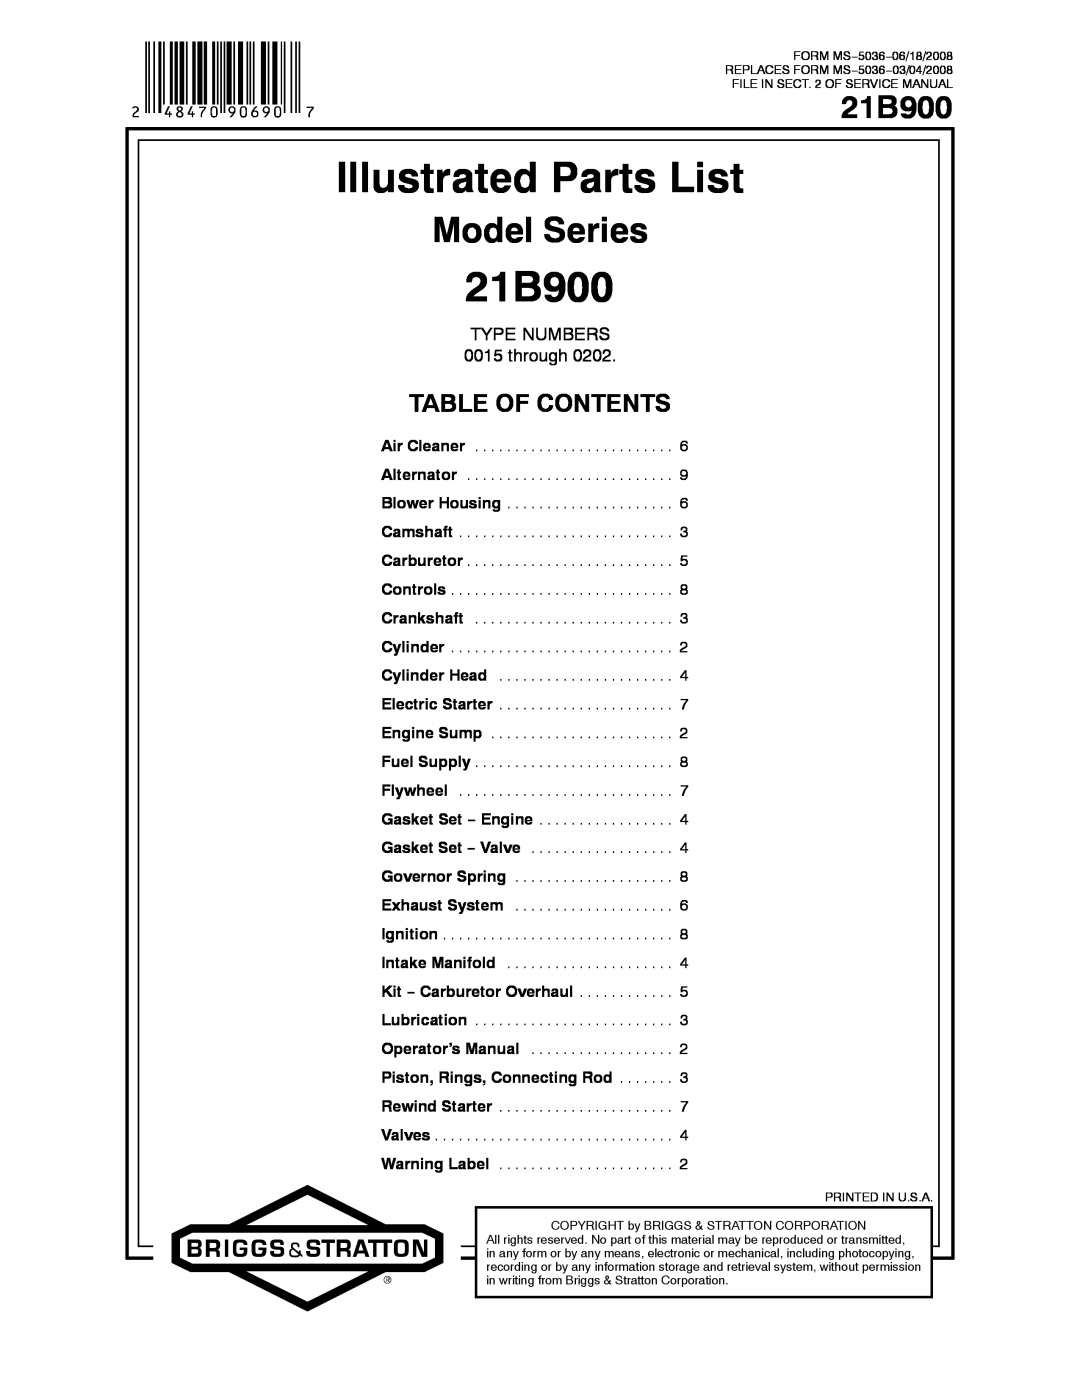 Briggs & Stratton 21B900 service manual Model Series, Illustrated Parts List, Table Of Contents, TYPE NUMBERS 0015 through 